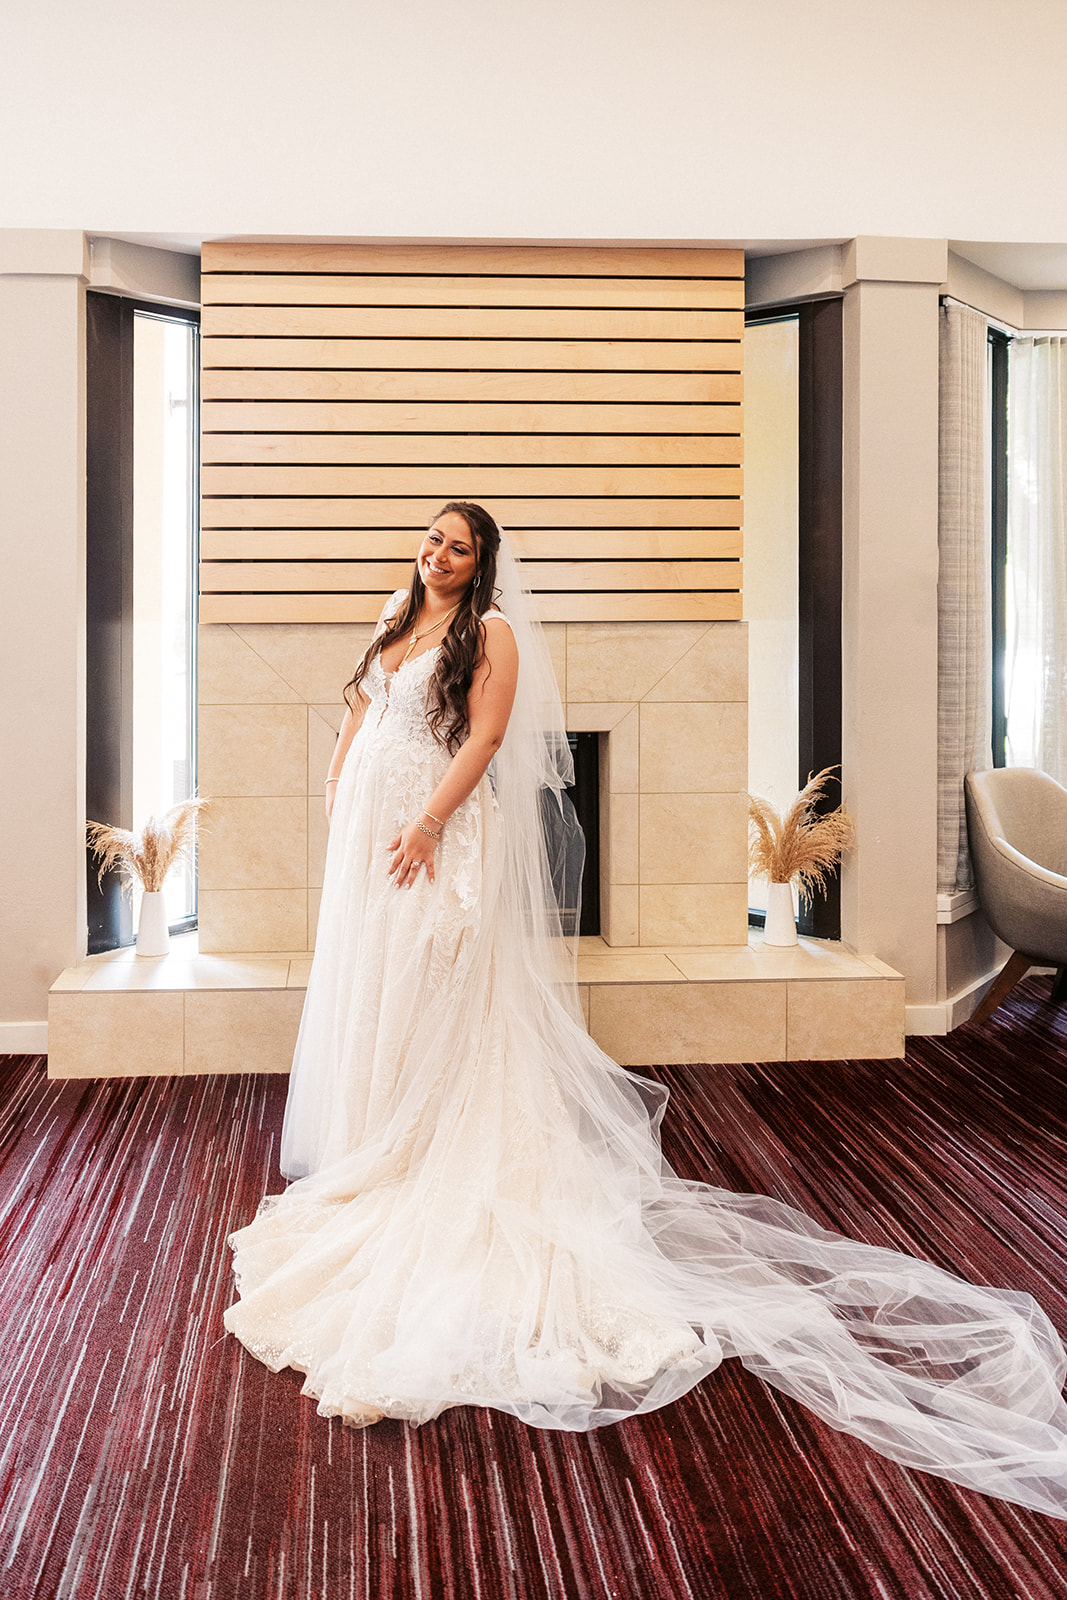 A bride displays her long train and veil in a hotel room while getting ready